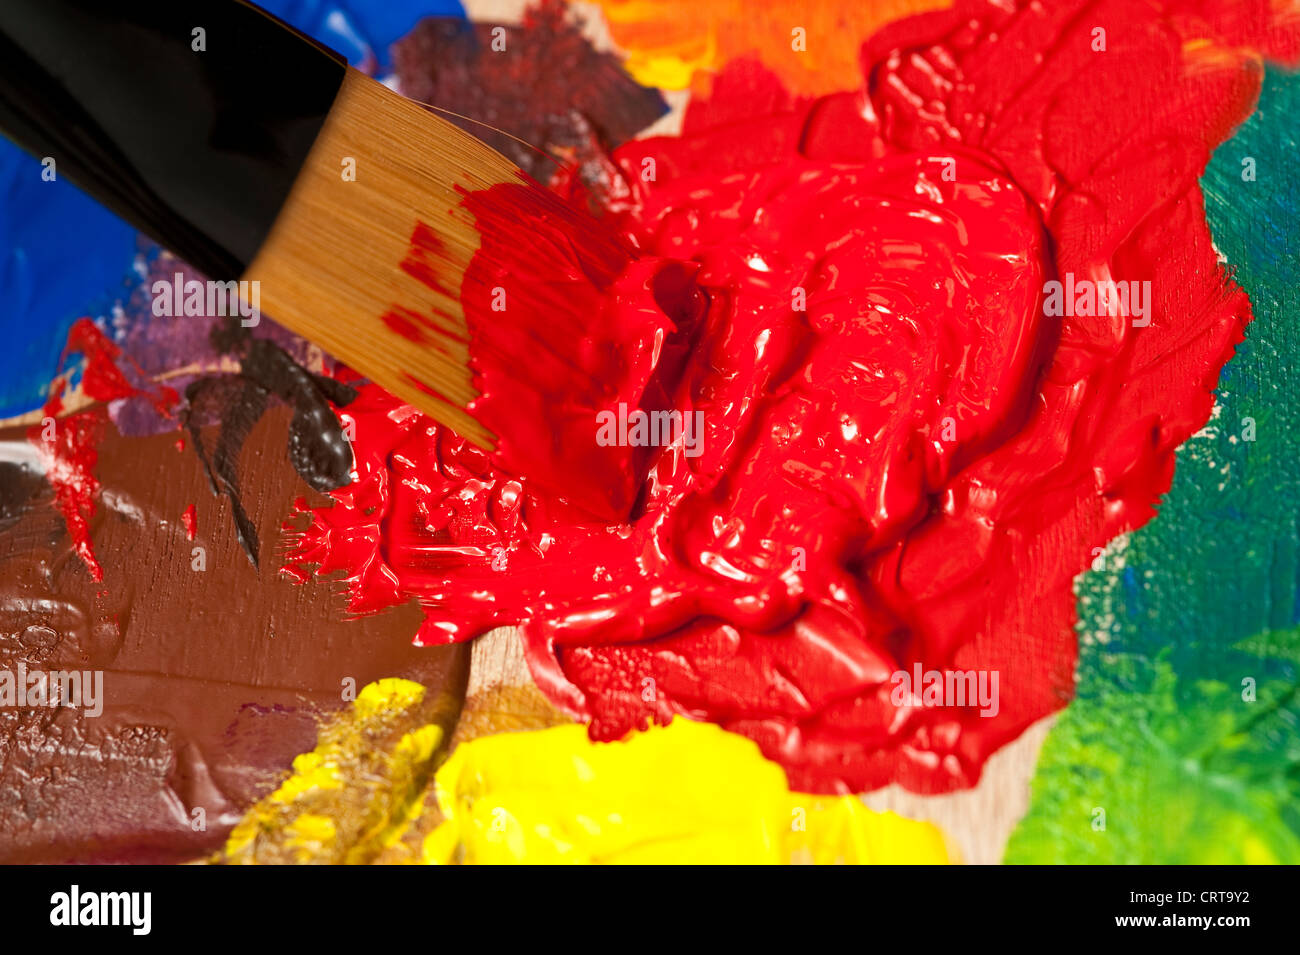 Multicolored palette and paint brush while mixing paint Stock Photo